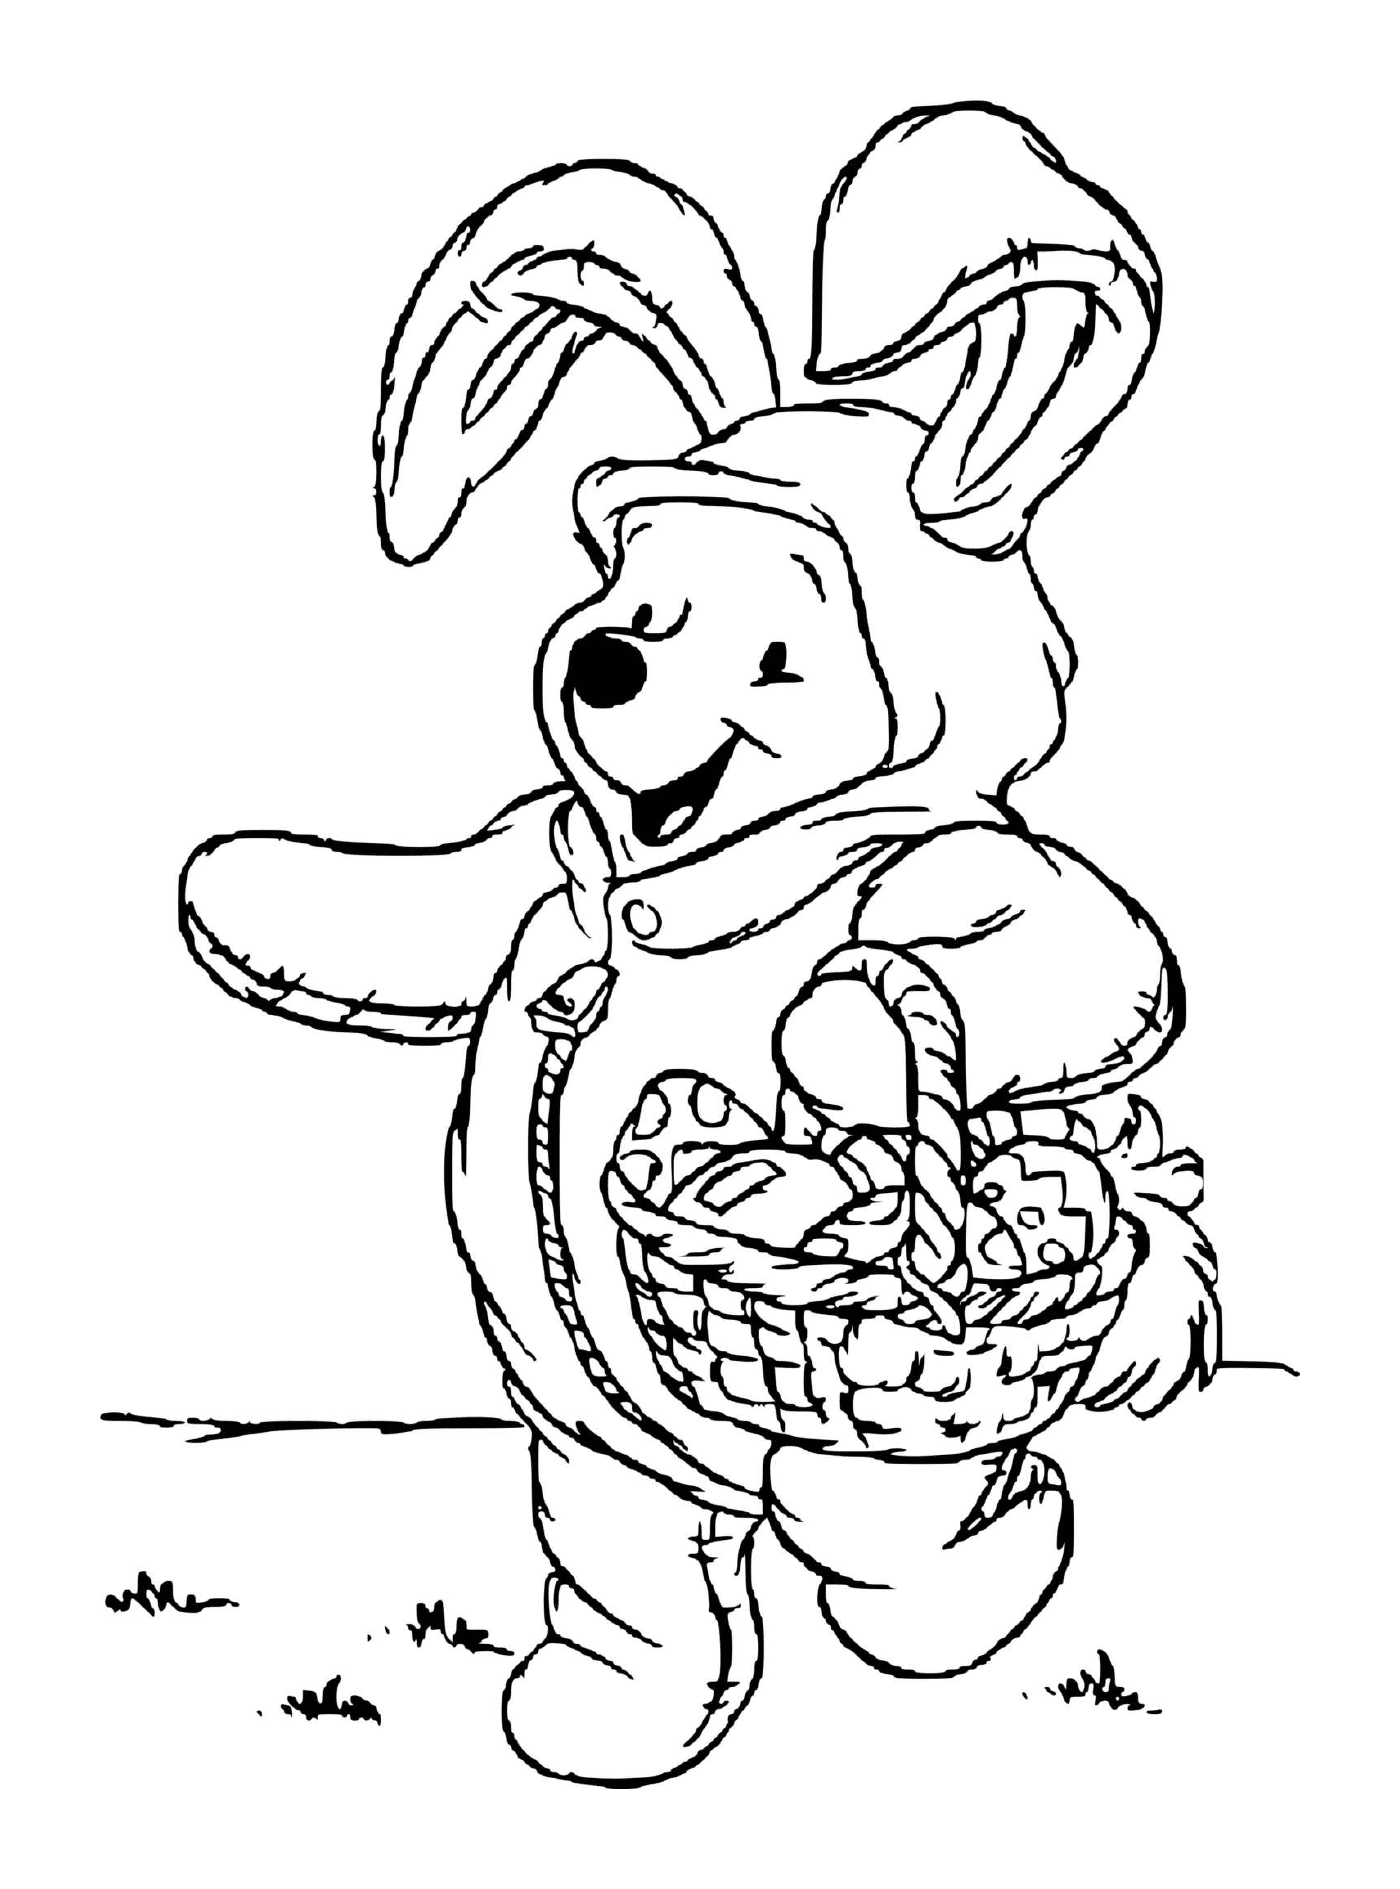  Winnie the bear disguised as a rabbit for Easter 